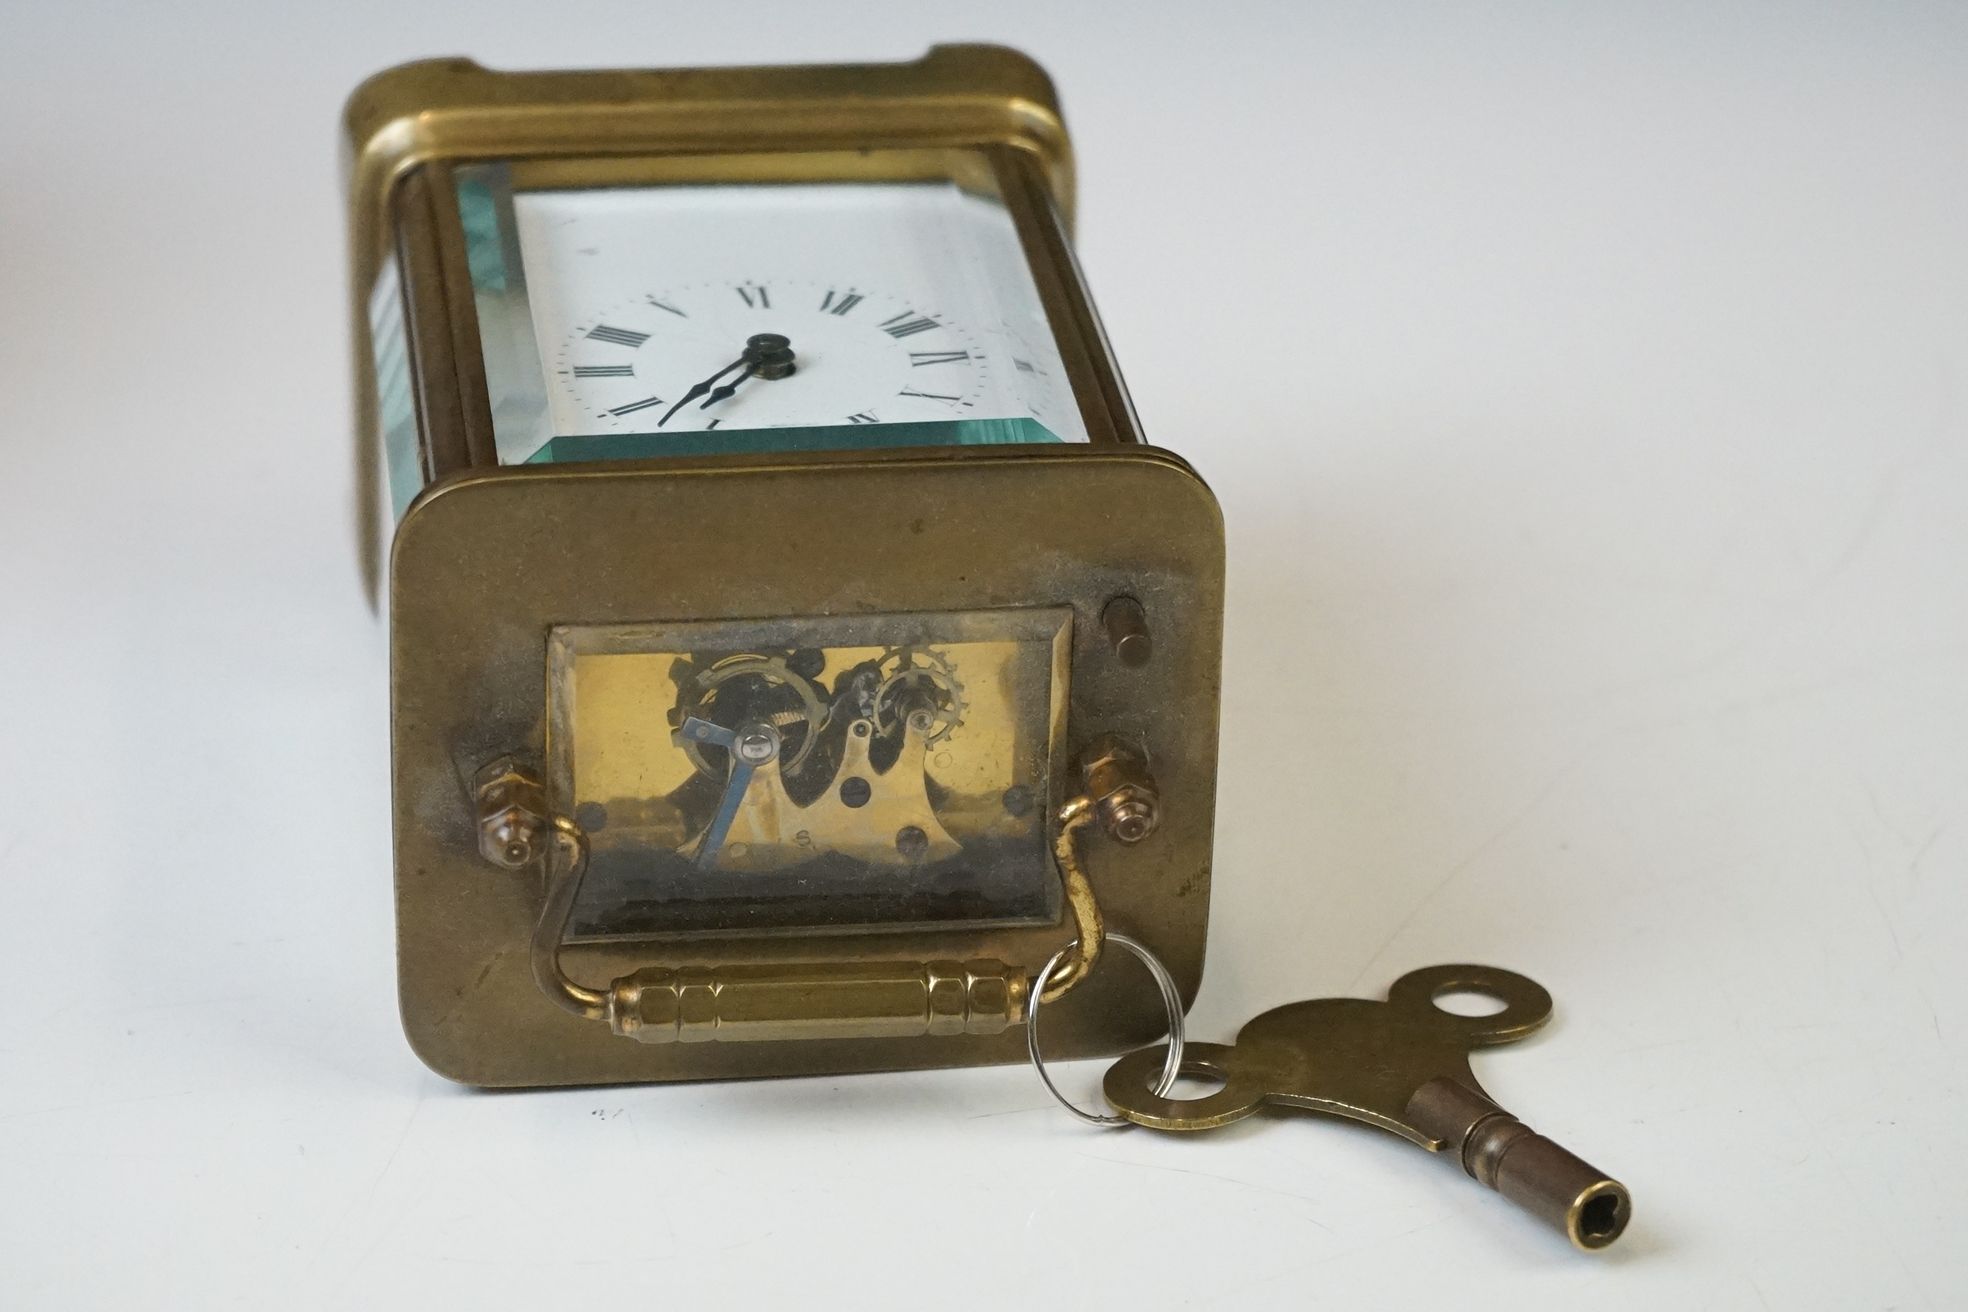 A brass cased carriage clock with beveled glass panels and white enamel dial, complete with key. - Image 12 of 15